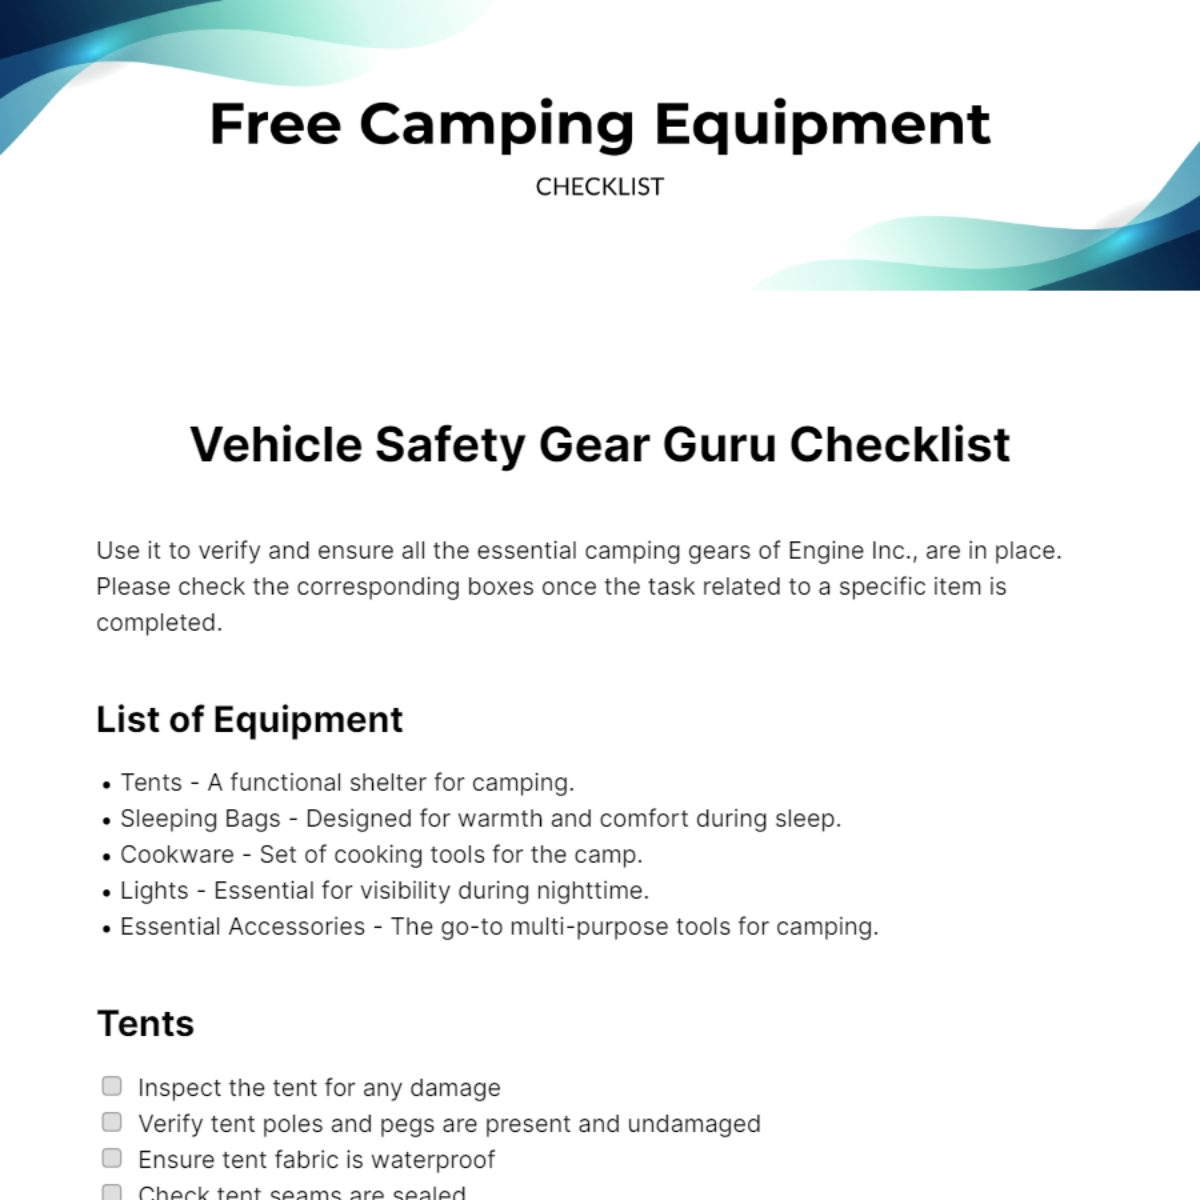 Free Camping Equipment Checklist Template